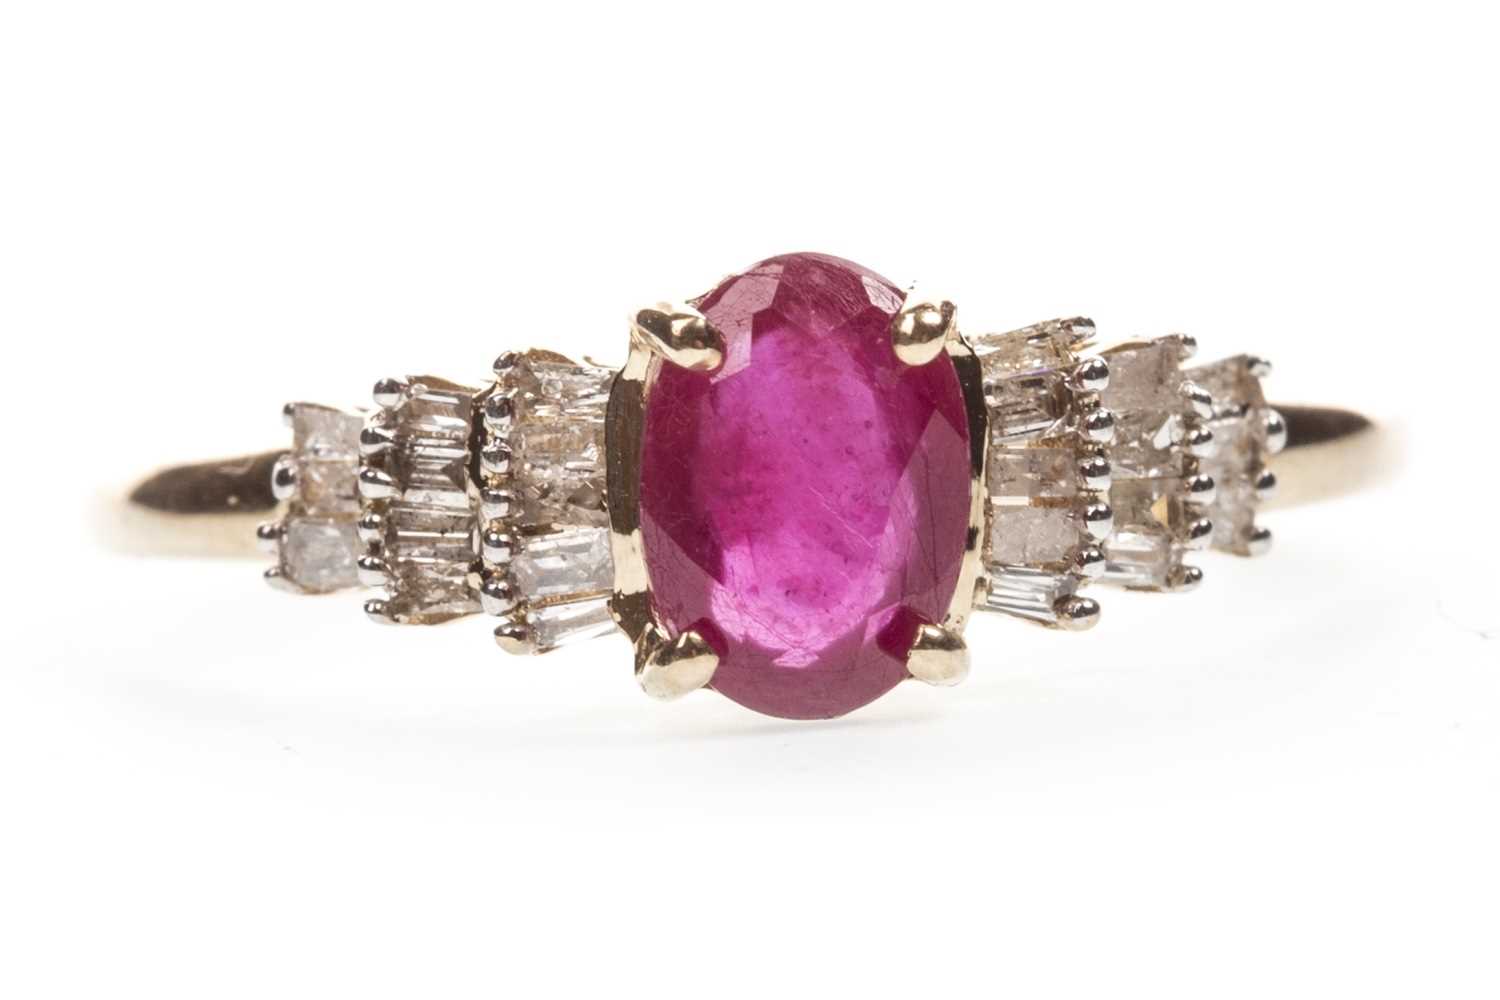 Lot 179 - A RUBY AND DIAMOND RING